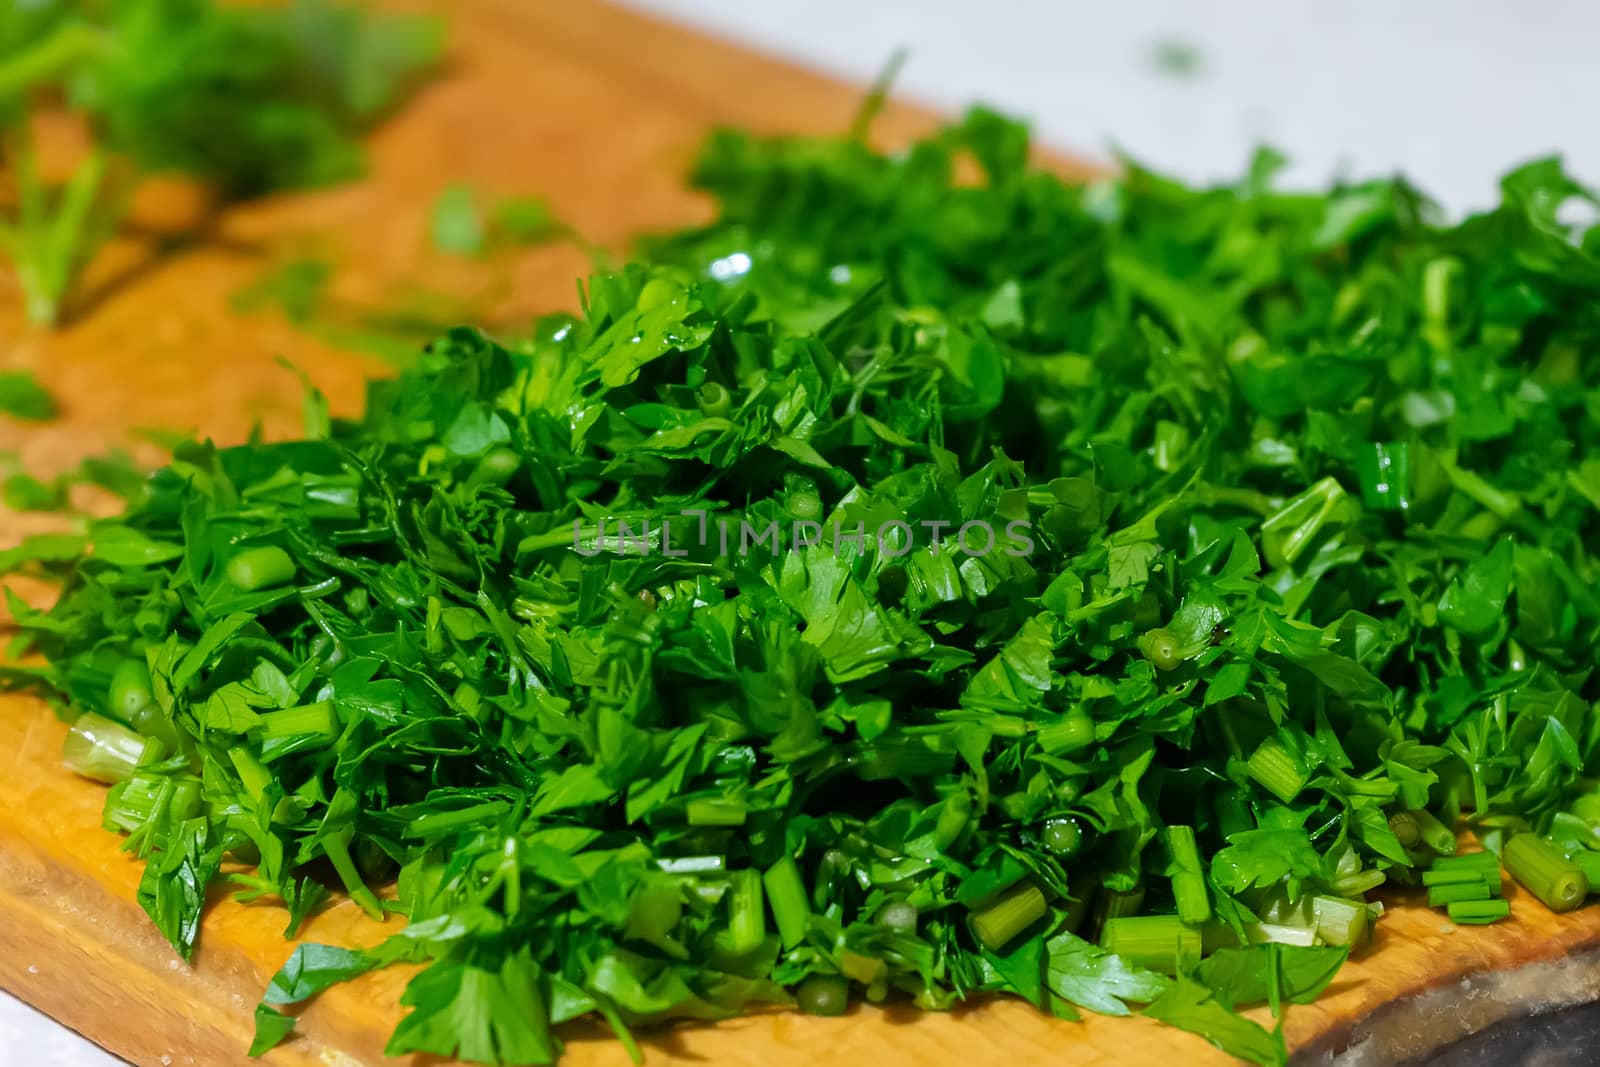 parsley greens finely chopped with a knife on a wooden board by Serhii_Voroshchuk